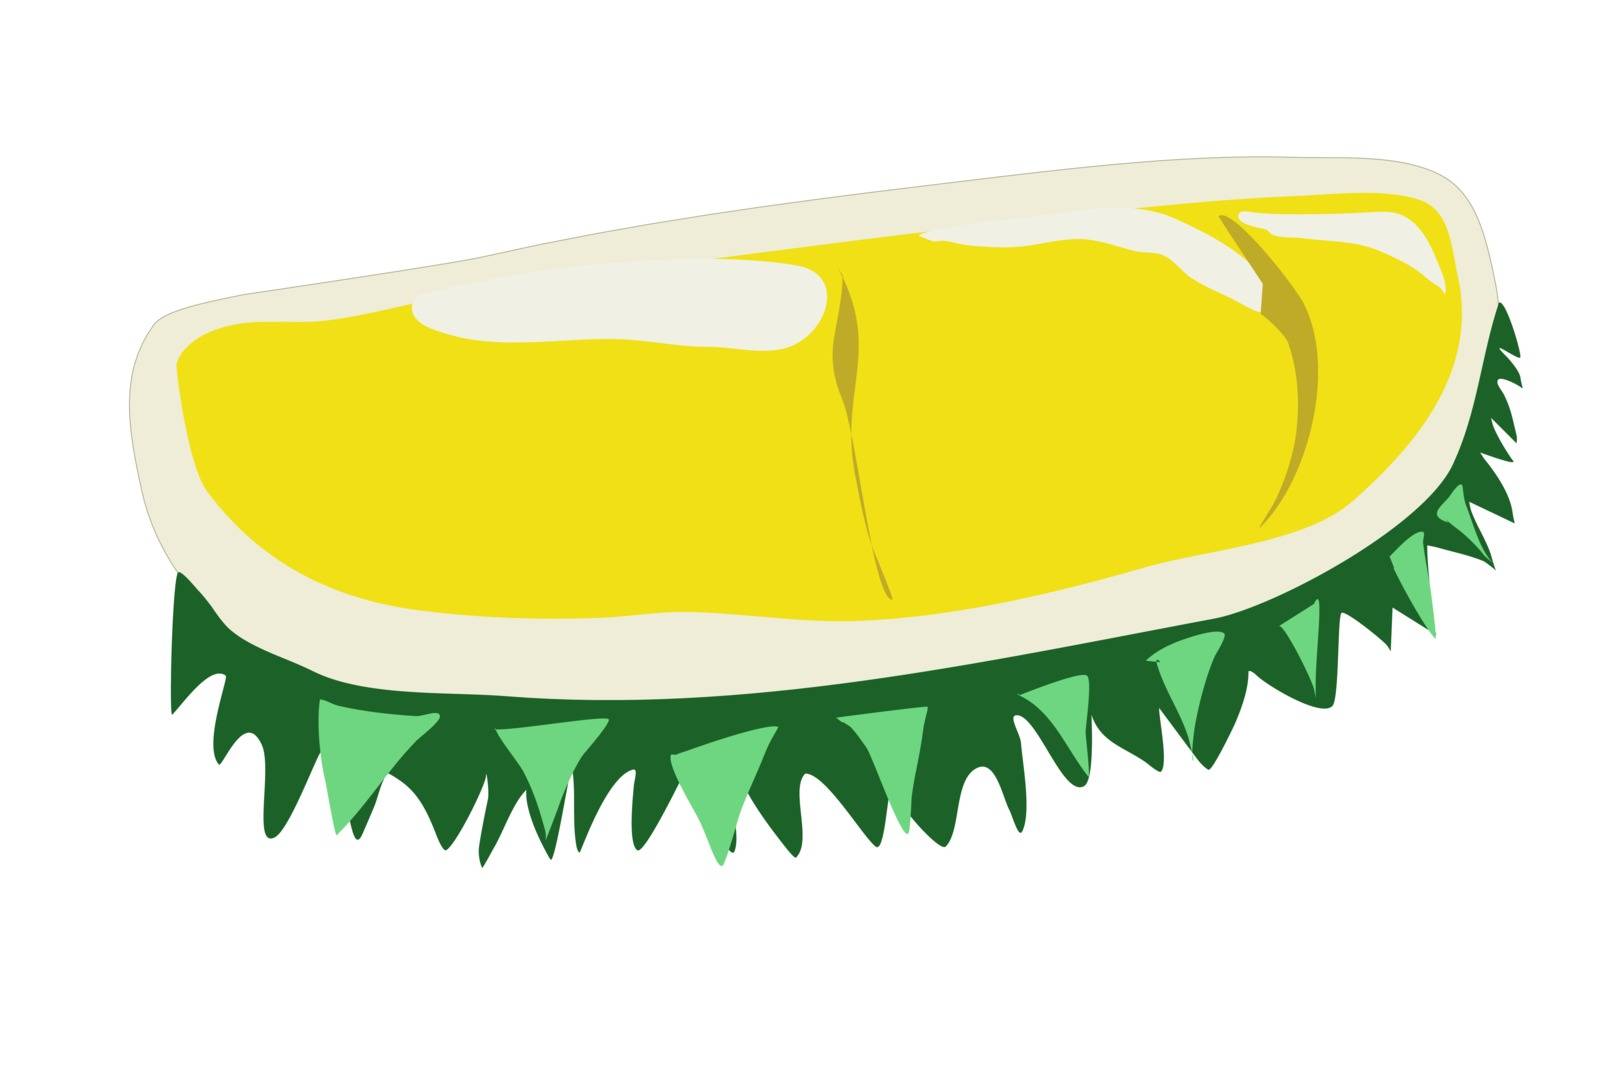 Durian Thai fruit isolate on white background. Vector illustration in flat style